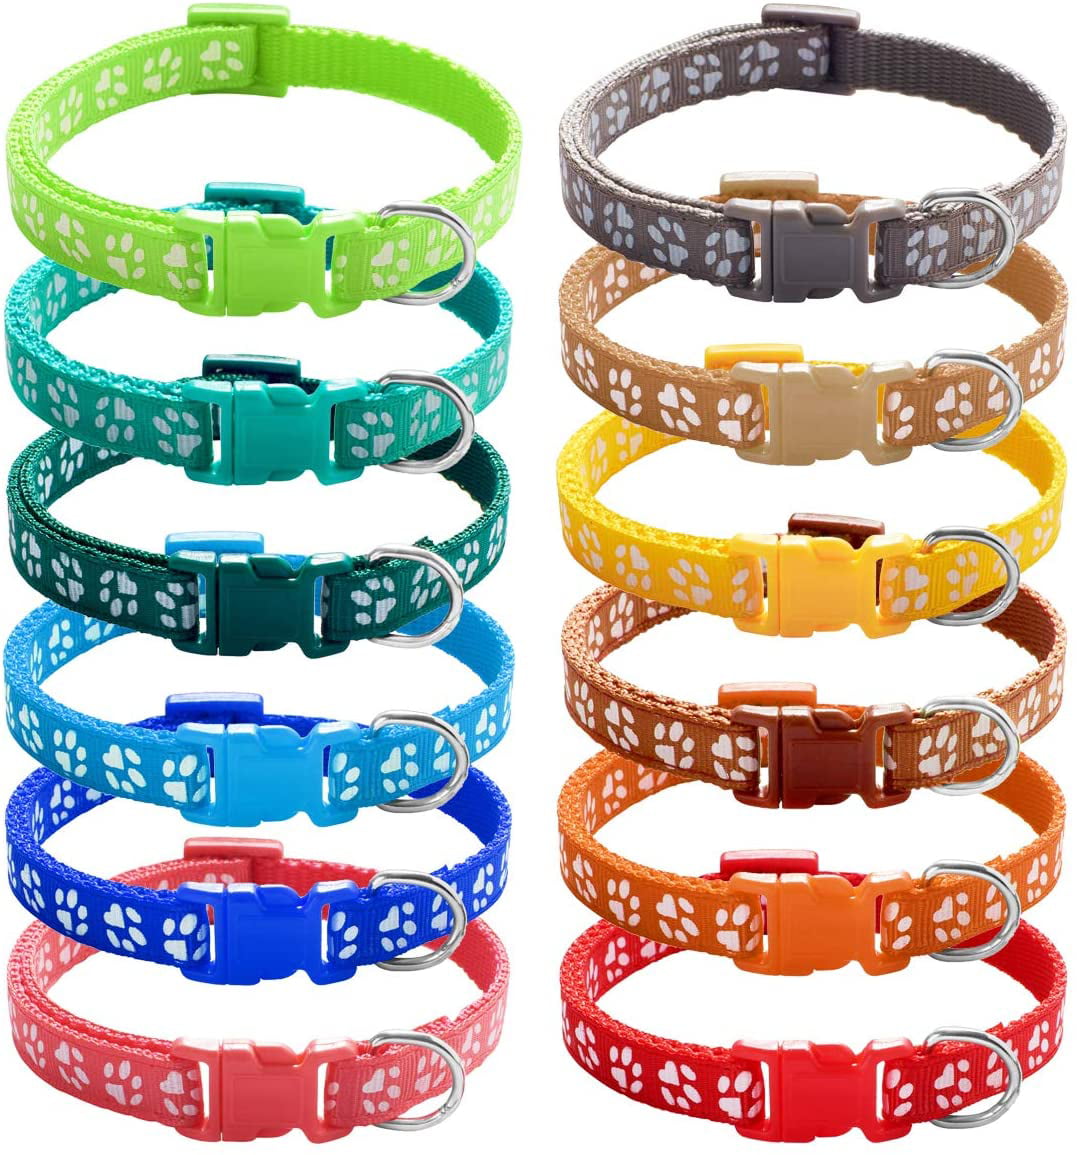 Neck 8-13 YOY 12 pcs/Set Soft Nylon Puppy Whelping ID Collars Adjustable Reusable Washable Baby Dog ID Bands Pet Identification for Breeders 